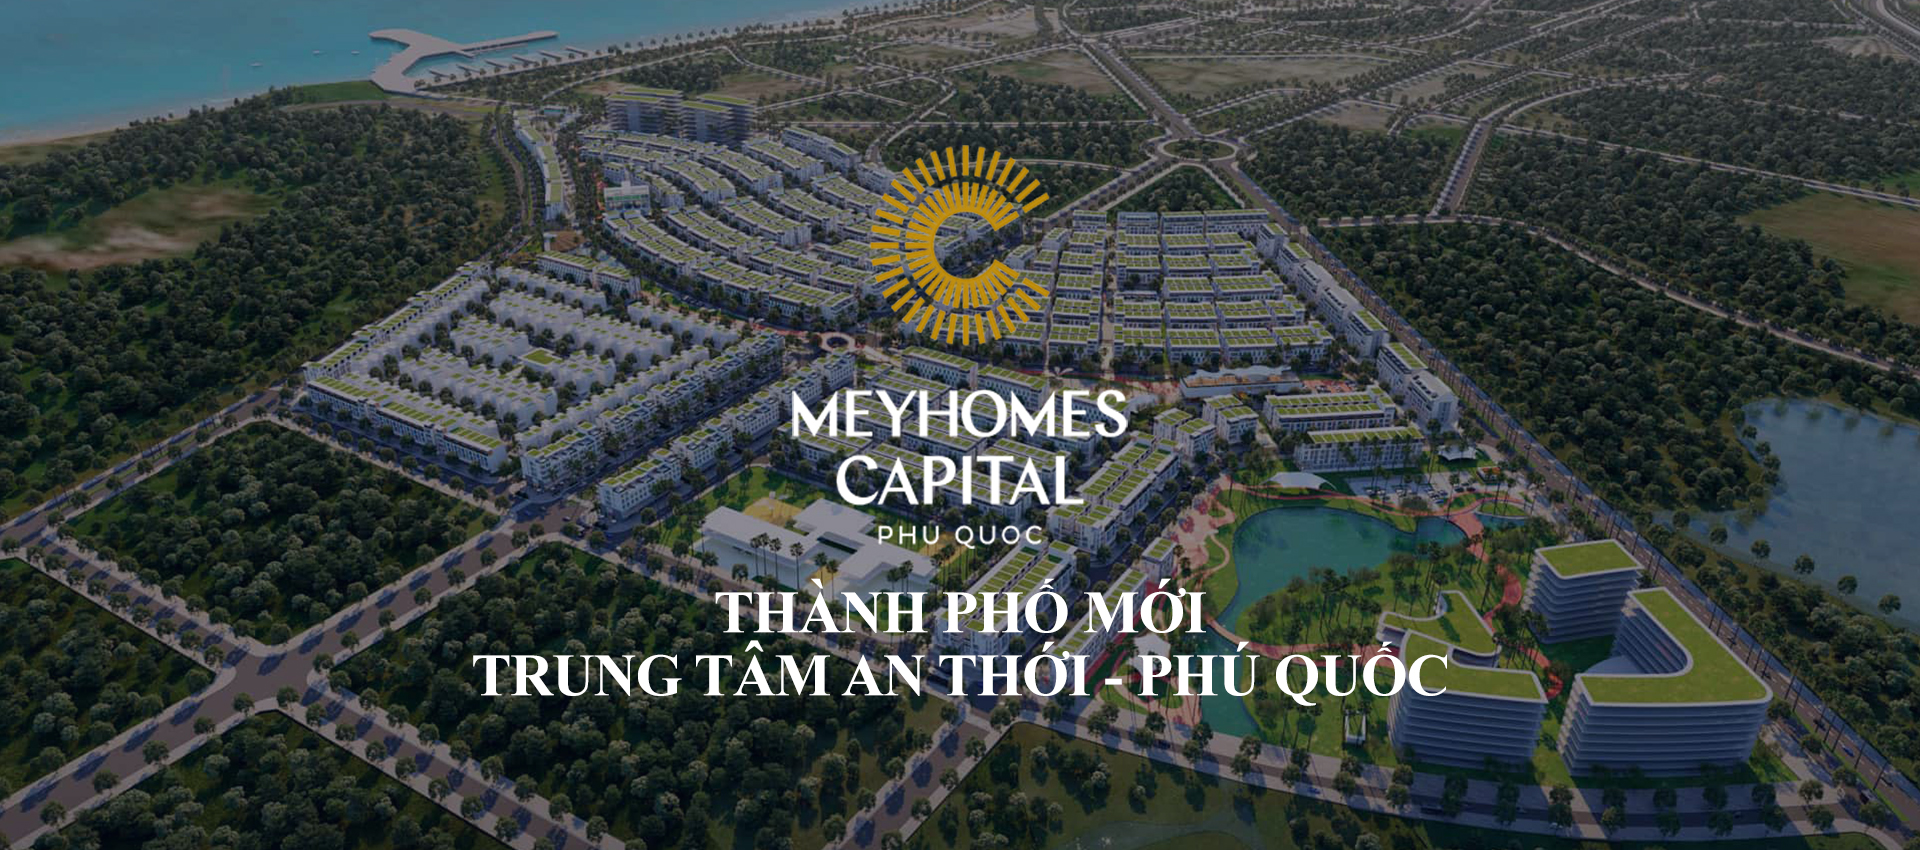 Meyhomes is a new city - An Thoi Center, Phu Quoc